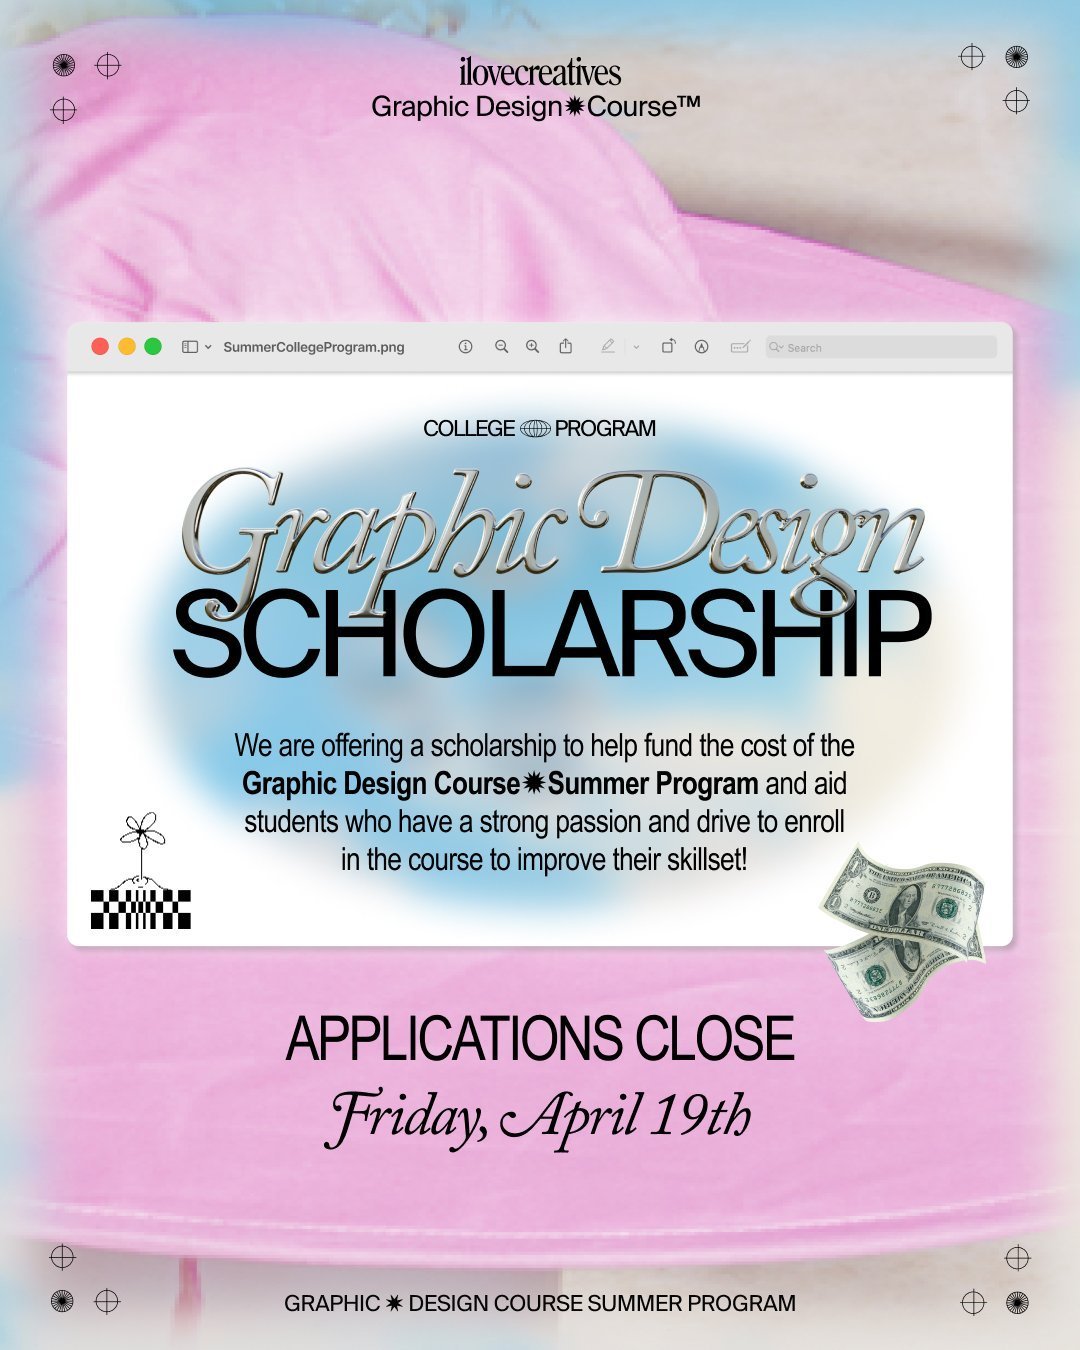 🔔 Just heard about the Graphic Design Course✹College Program Scholarship? Don&rsquo;t worry, you still have 5 more days to apply! We&rsquo;re offering need-based scholarships to help passionate students and recent grads fund the cost of the college 